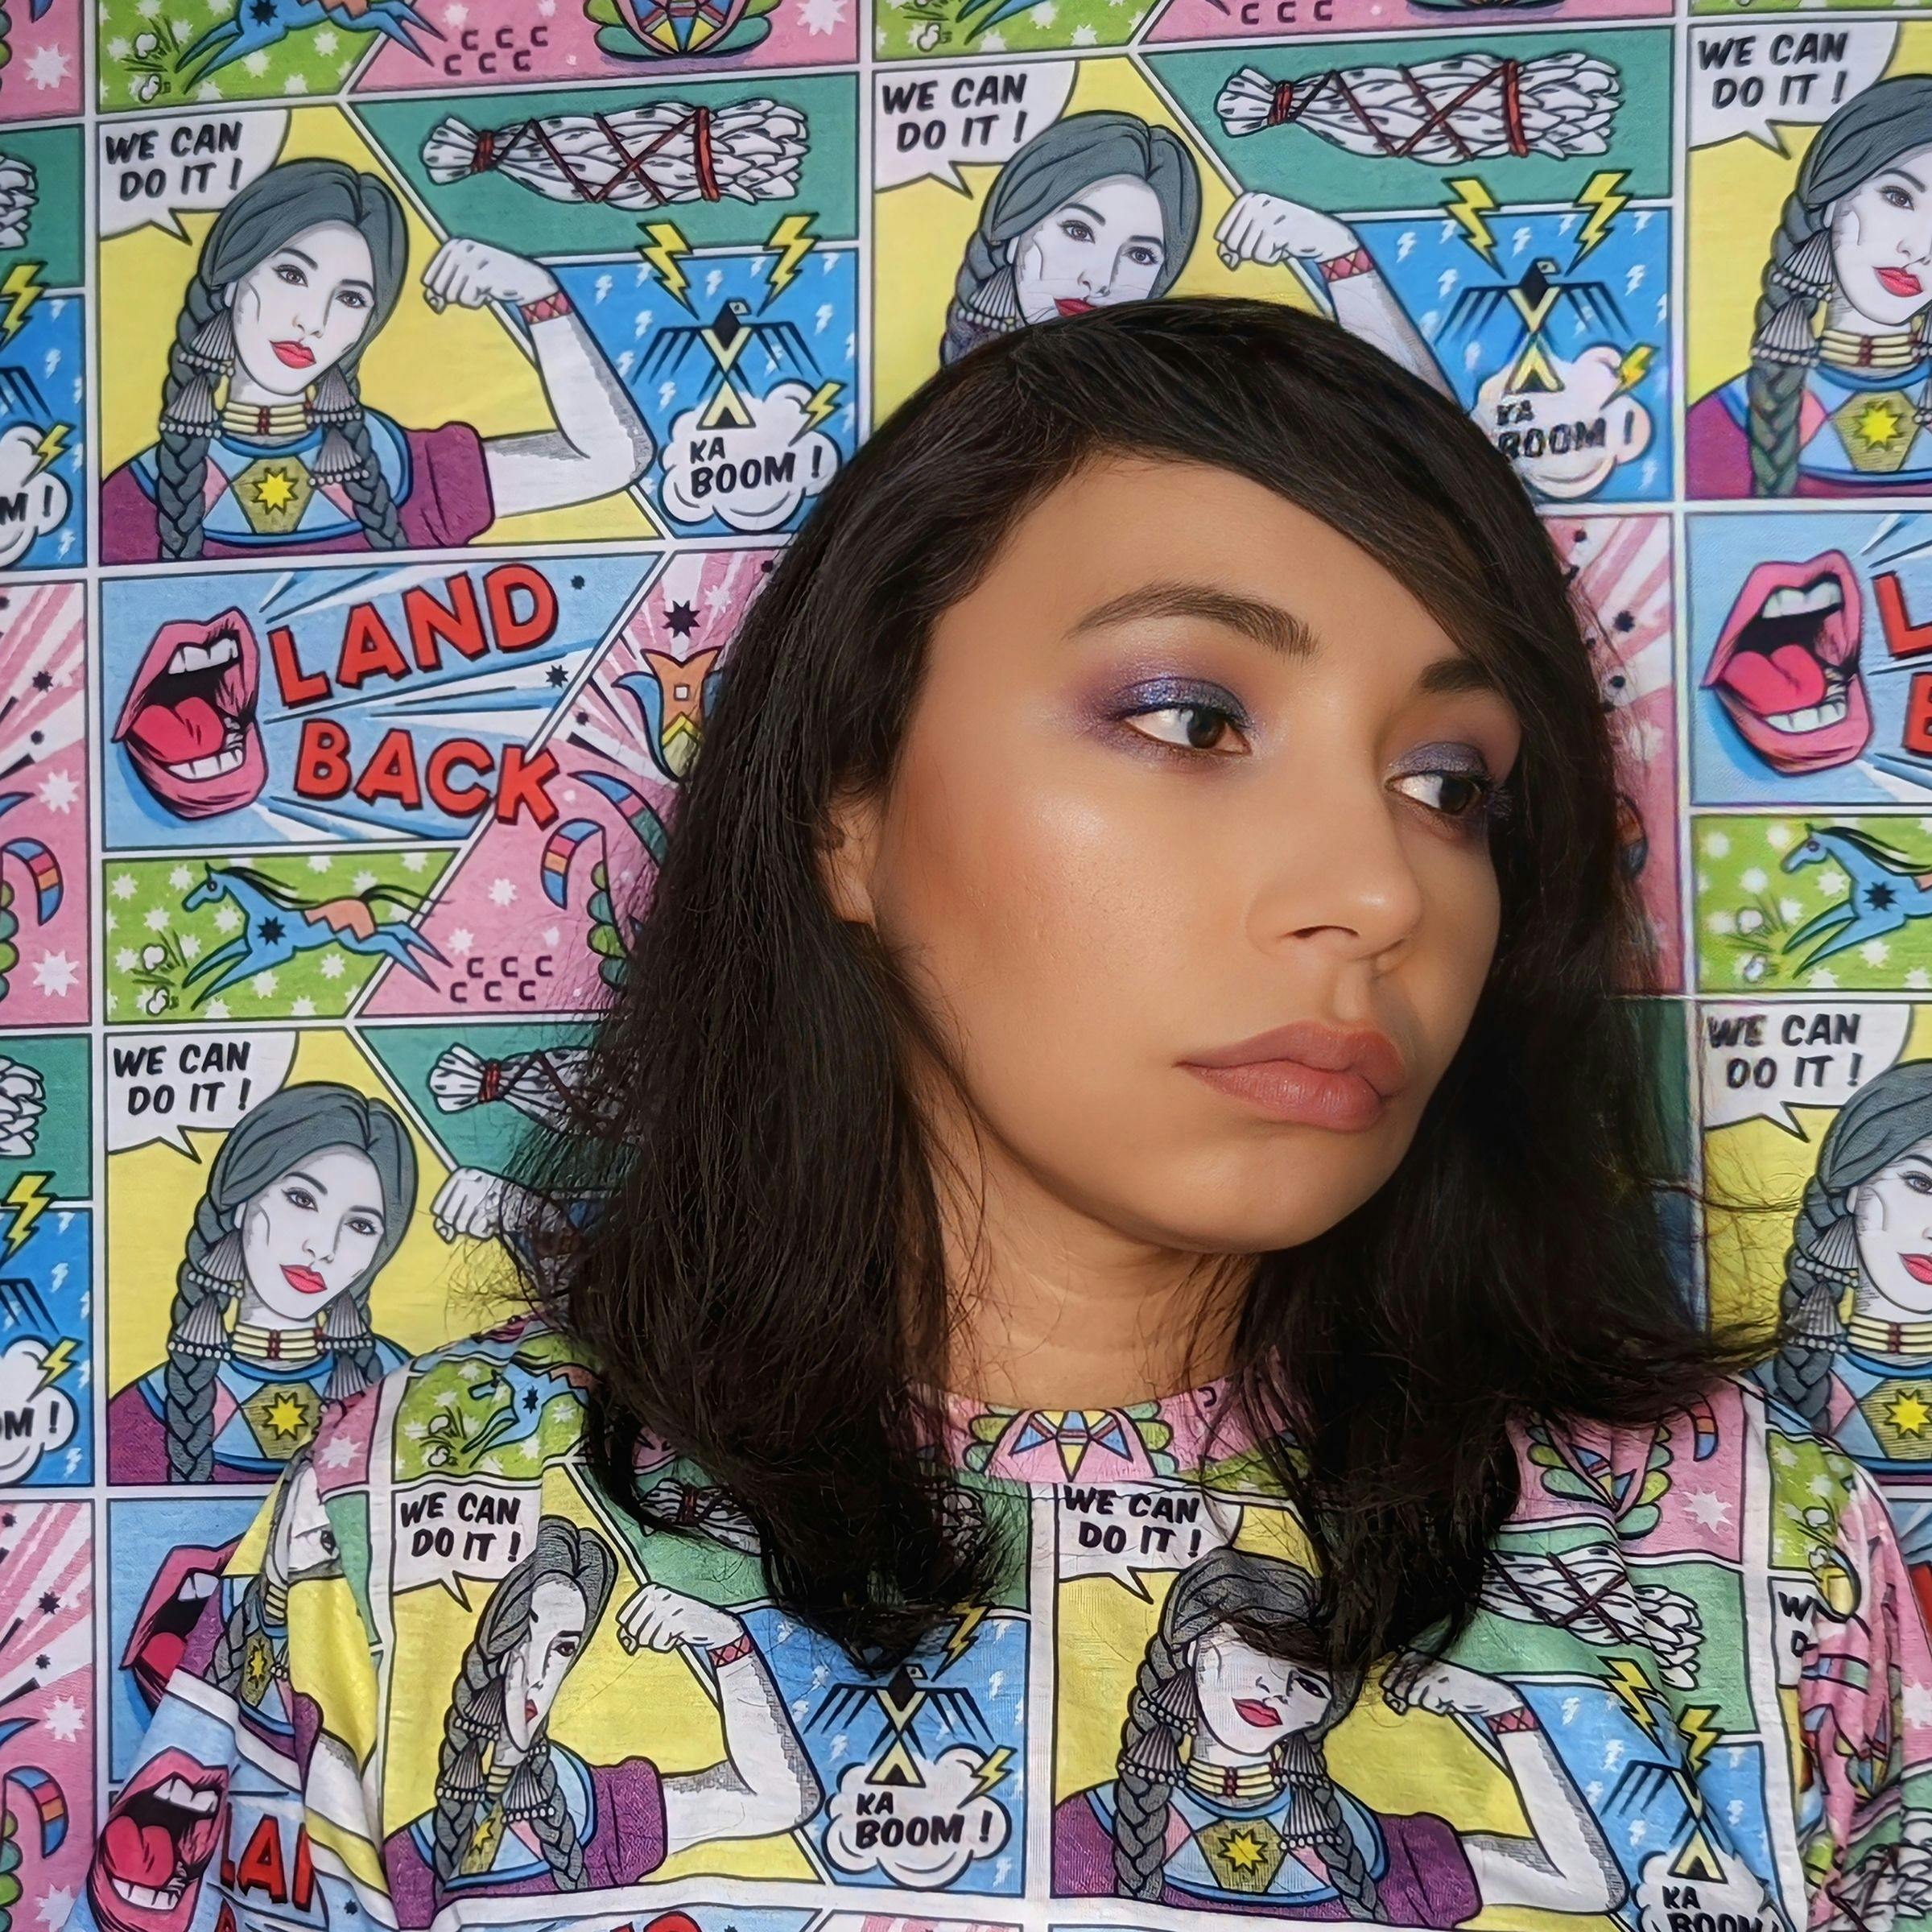 A Native American woman with brown skin, brown eyes, and shoulder-length brown hair looks off to the right at a 3/4th profile view. Her shirt and the background share the same colorful pattern, a comic book-style print of her own design, featuring a Native American woman flexing her arm with the phrases "We can do it" and "Land back."